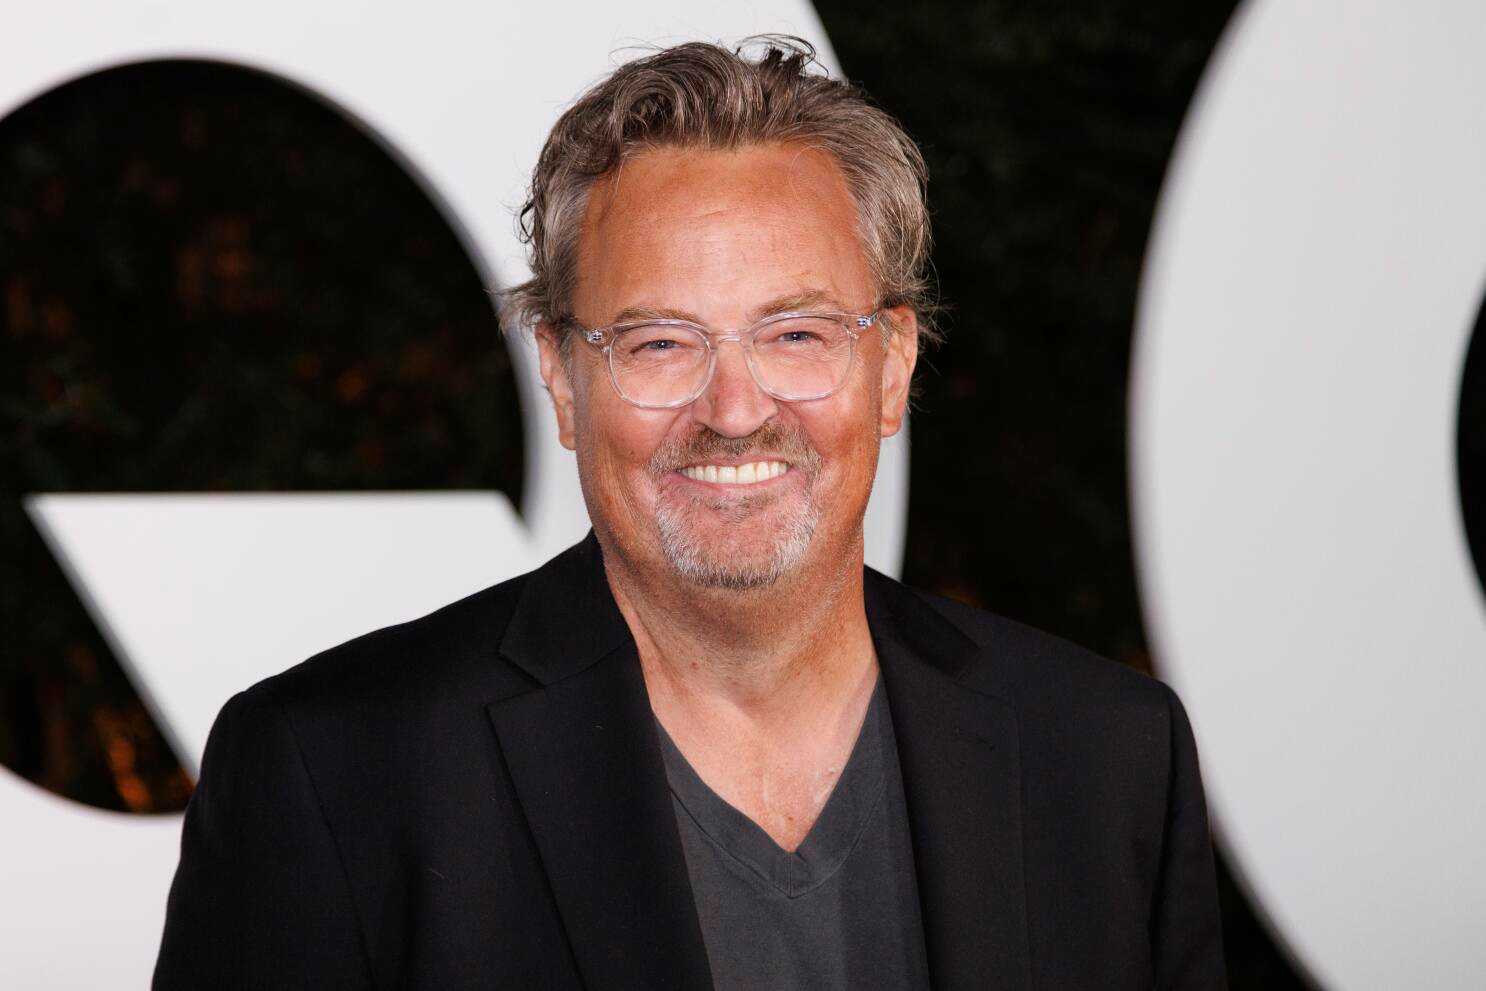 BAFTA to honor Matthew Perry at TV awards following controversy over his exclusion from film In memoriam